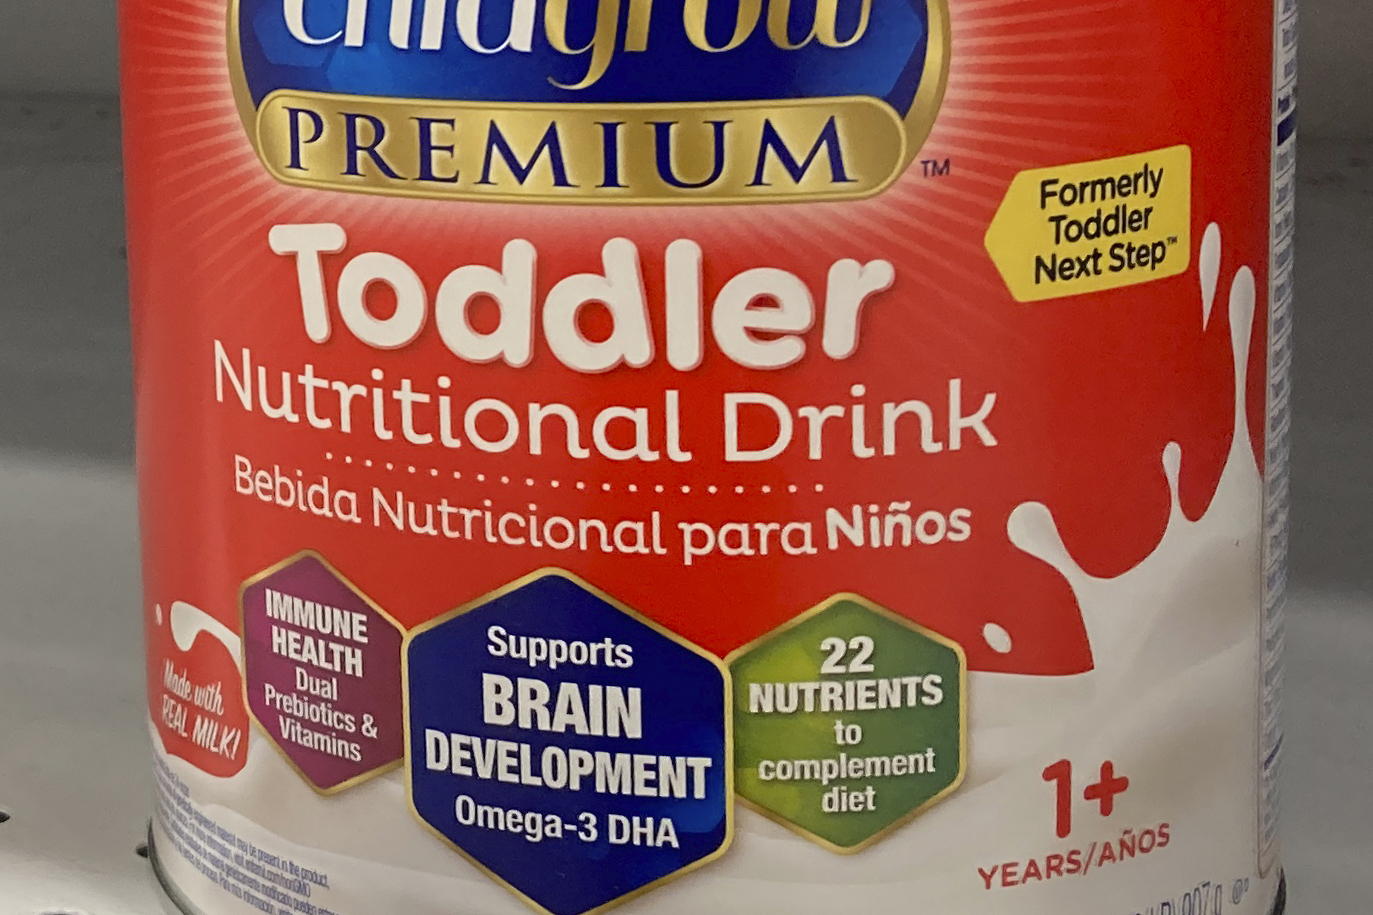 How Much Milk Should a Toddler Drink?